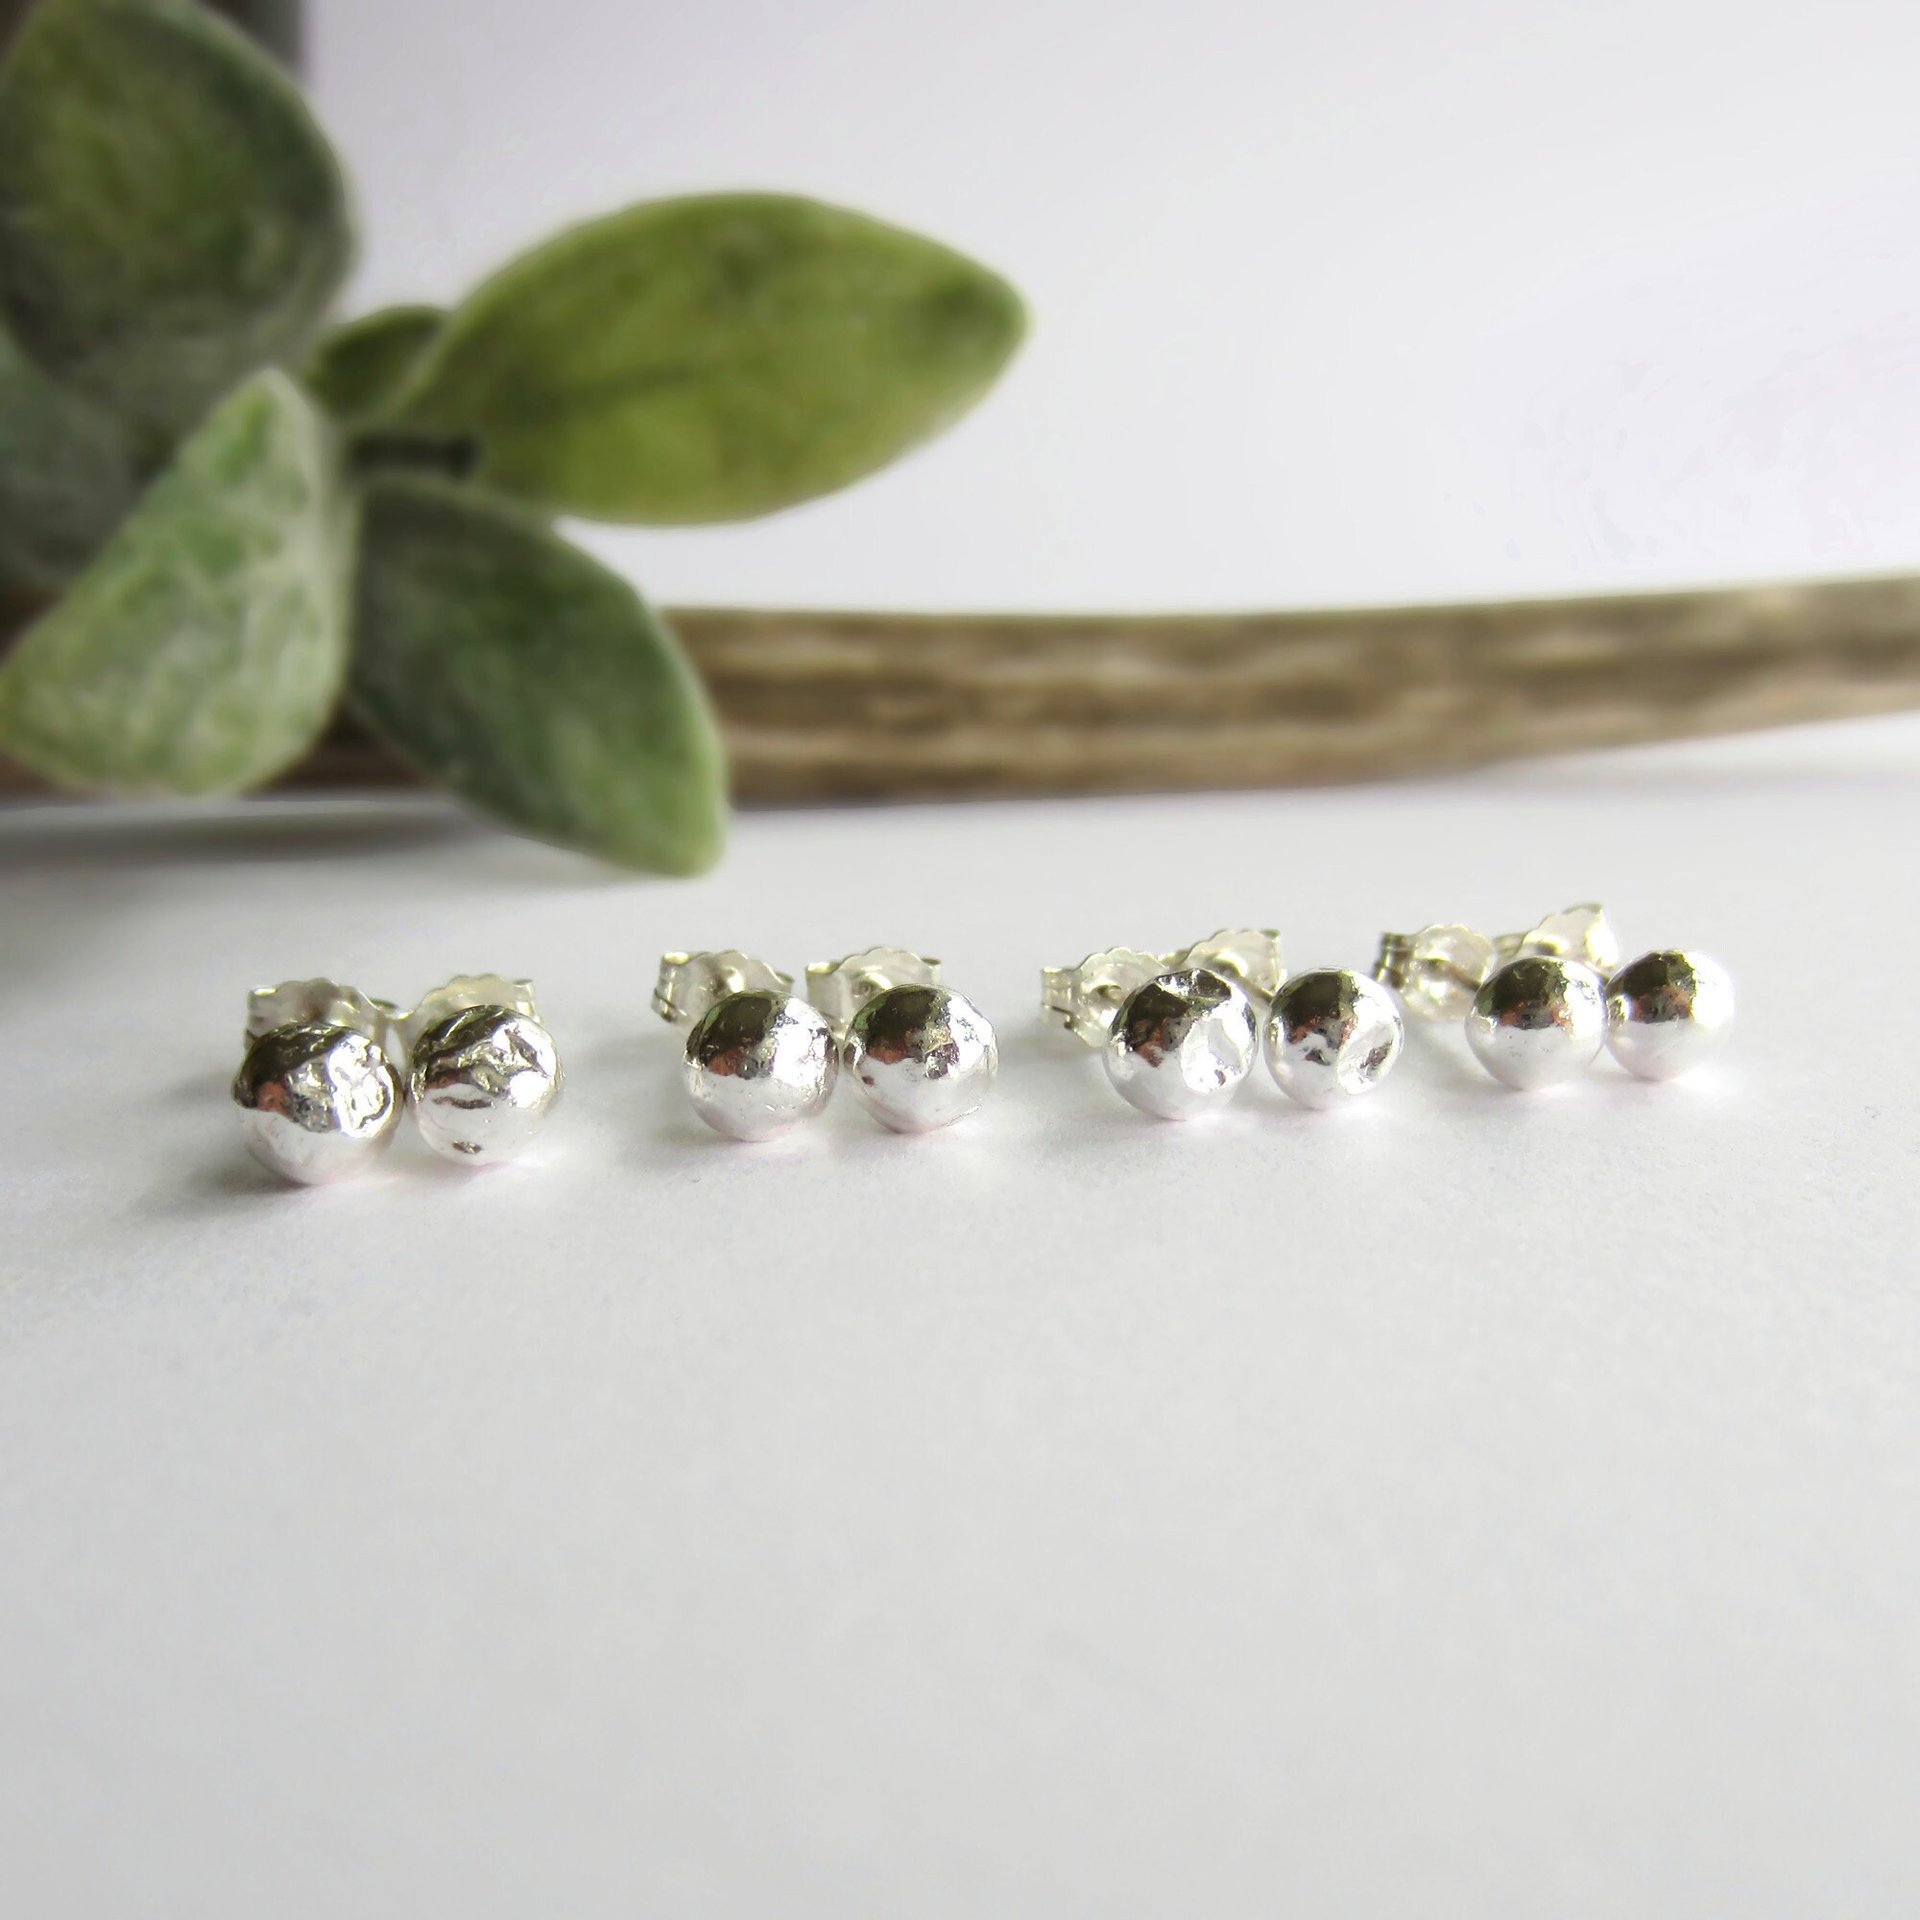 Recycled Sterling Silver Pebble or Ball Stud Earrings ~ Handmade by The Tiny Tree Frog Jewellery